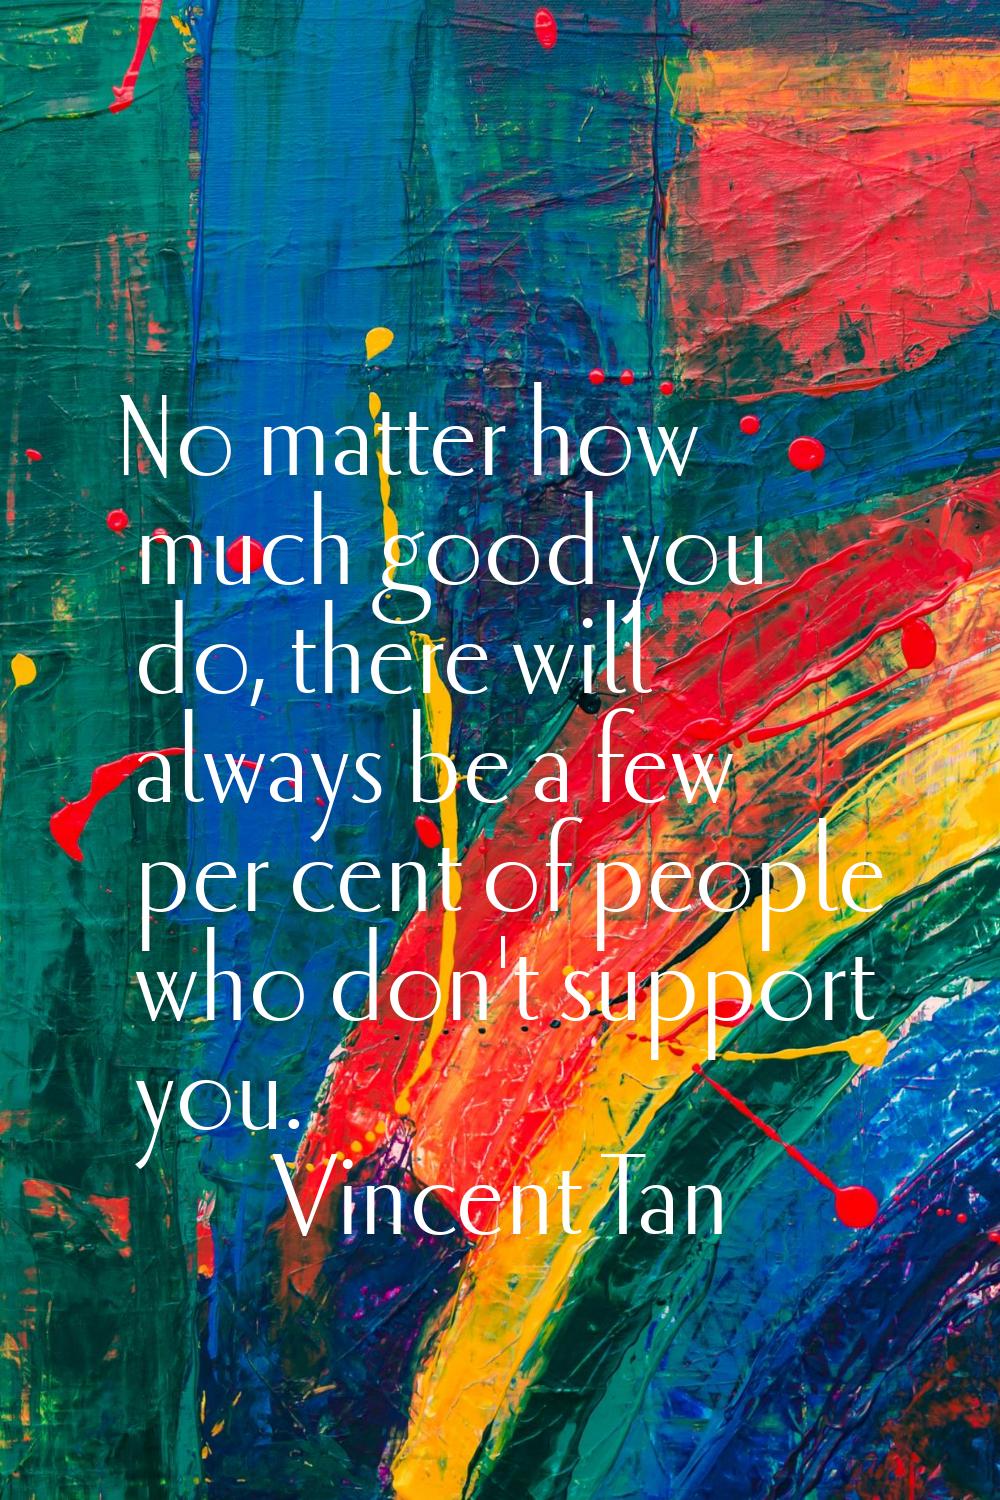 No matter how much good you do, there will always be a few per cent of people who don't support you